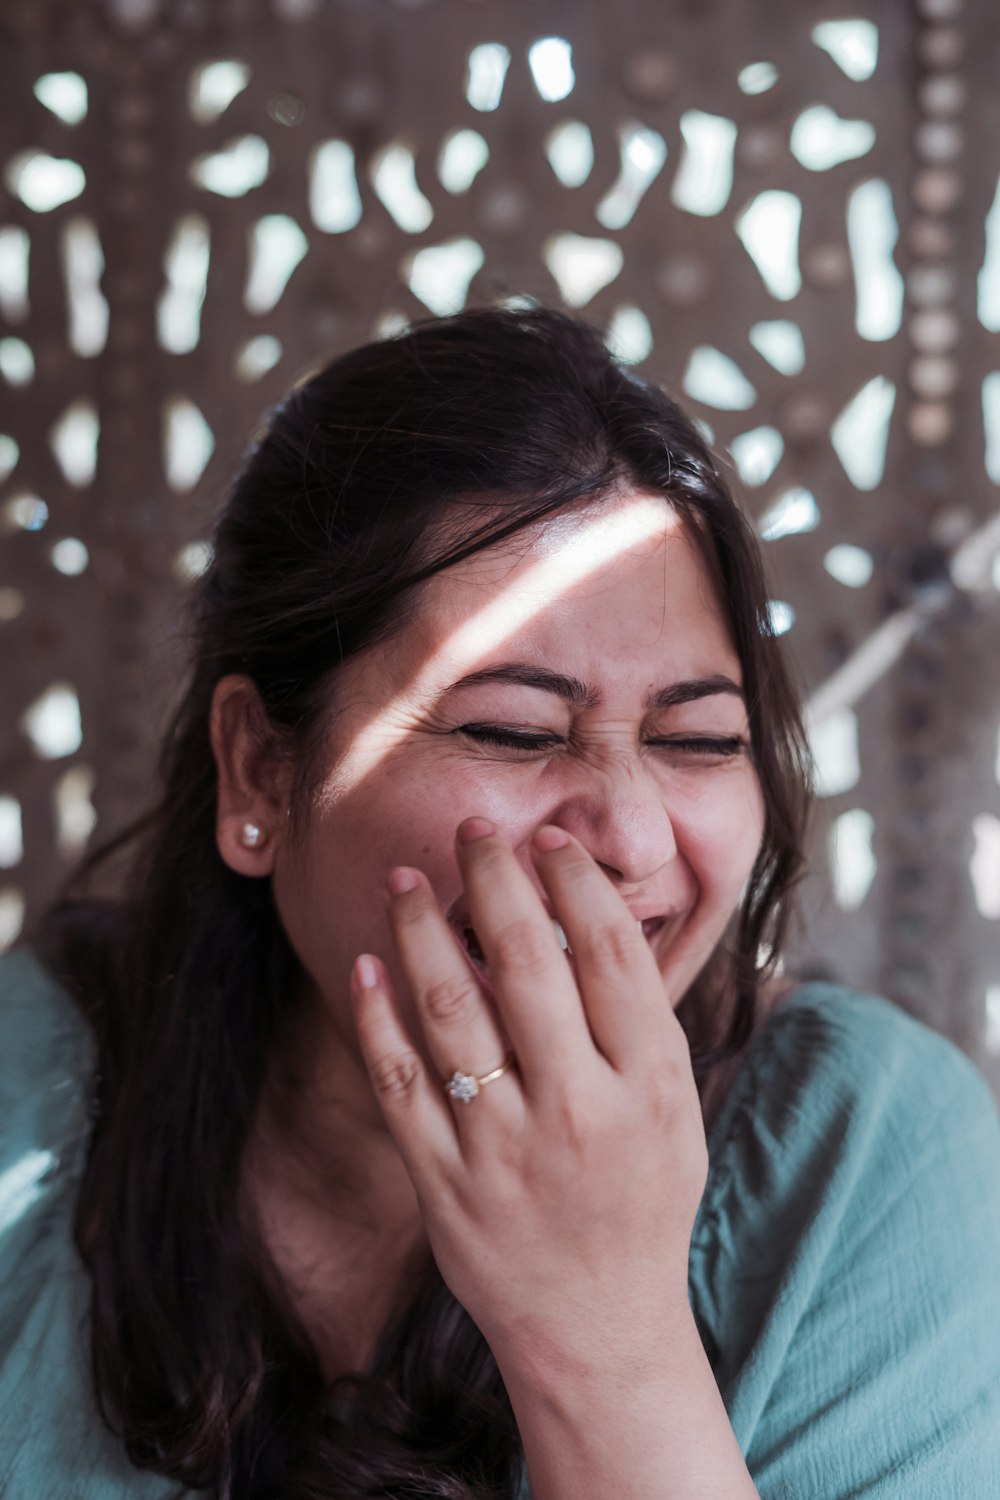 a woman laughing while holding her hand to her face